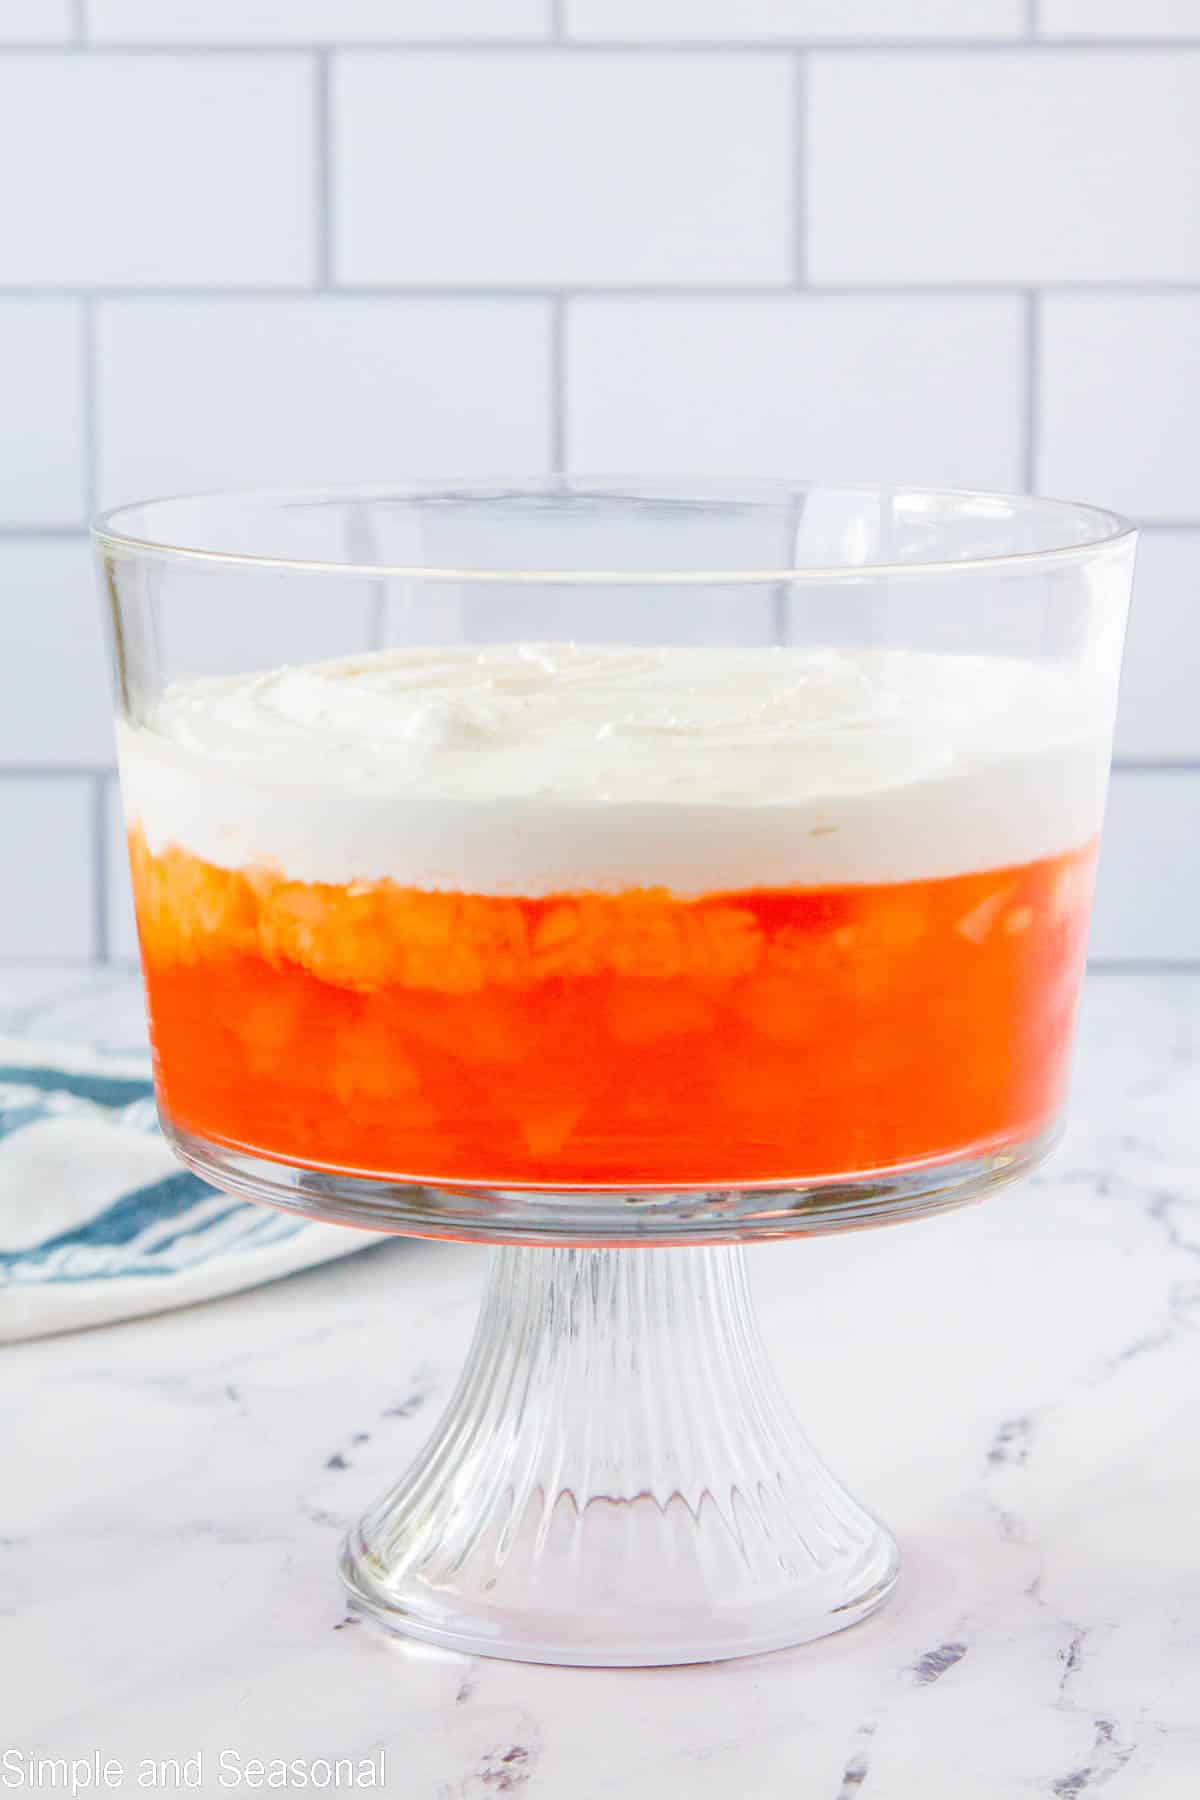 cream cheese and whipped topping layer on top of orange jello